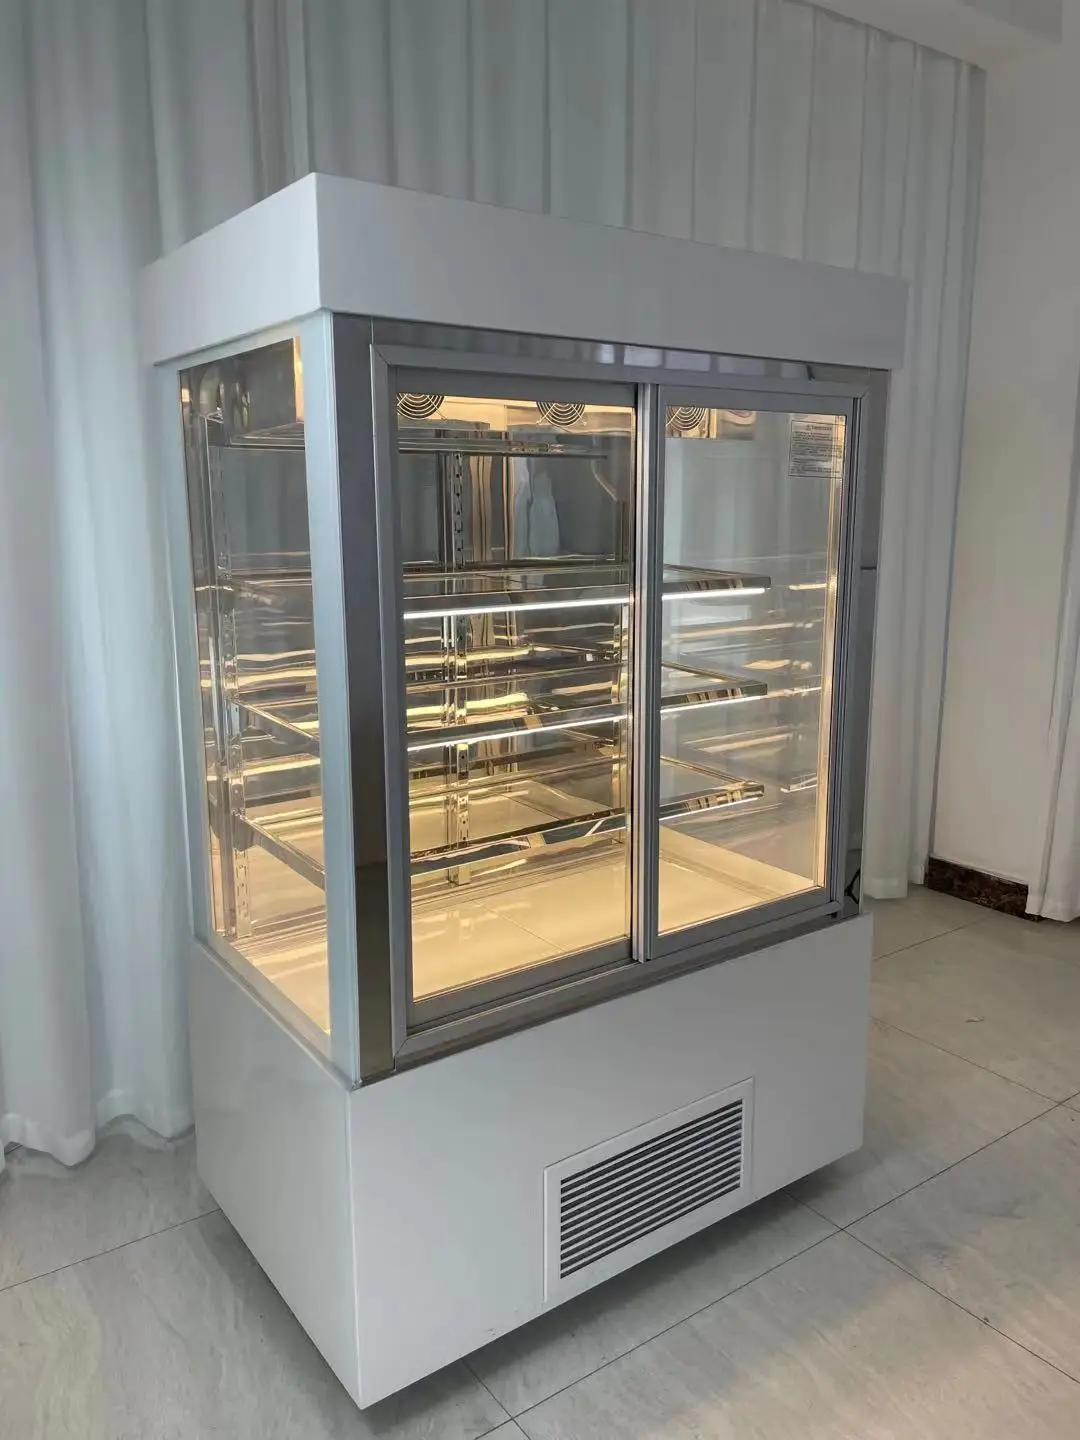 Fan Cooling Open Display Sweet Food Bakery Cake Display Cases Fridge Refrigerator Equipment For Sale